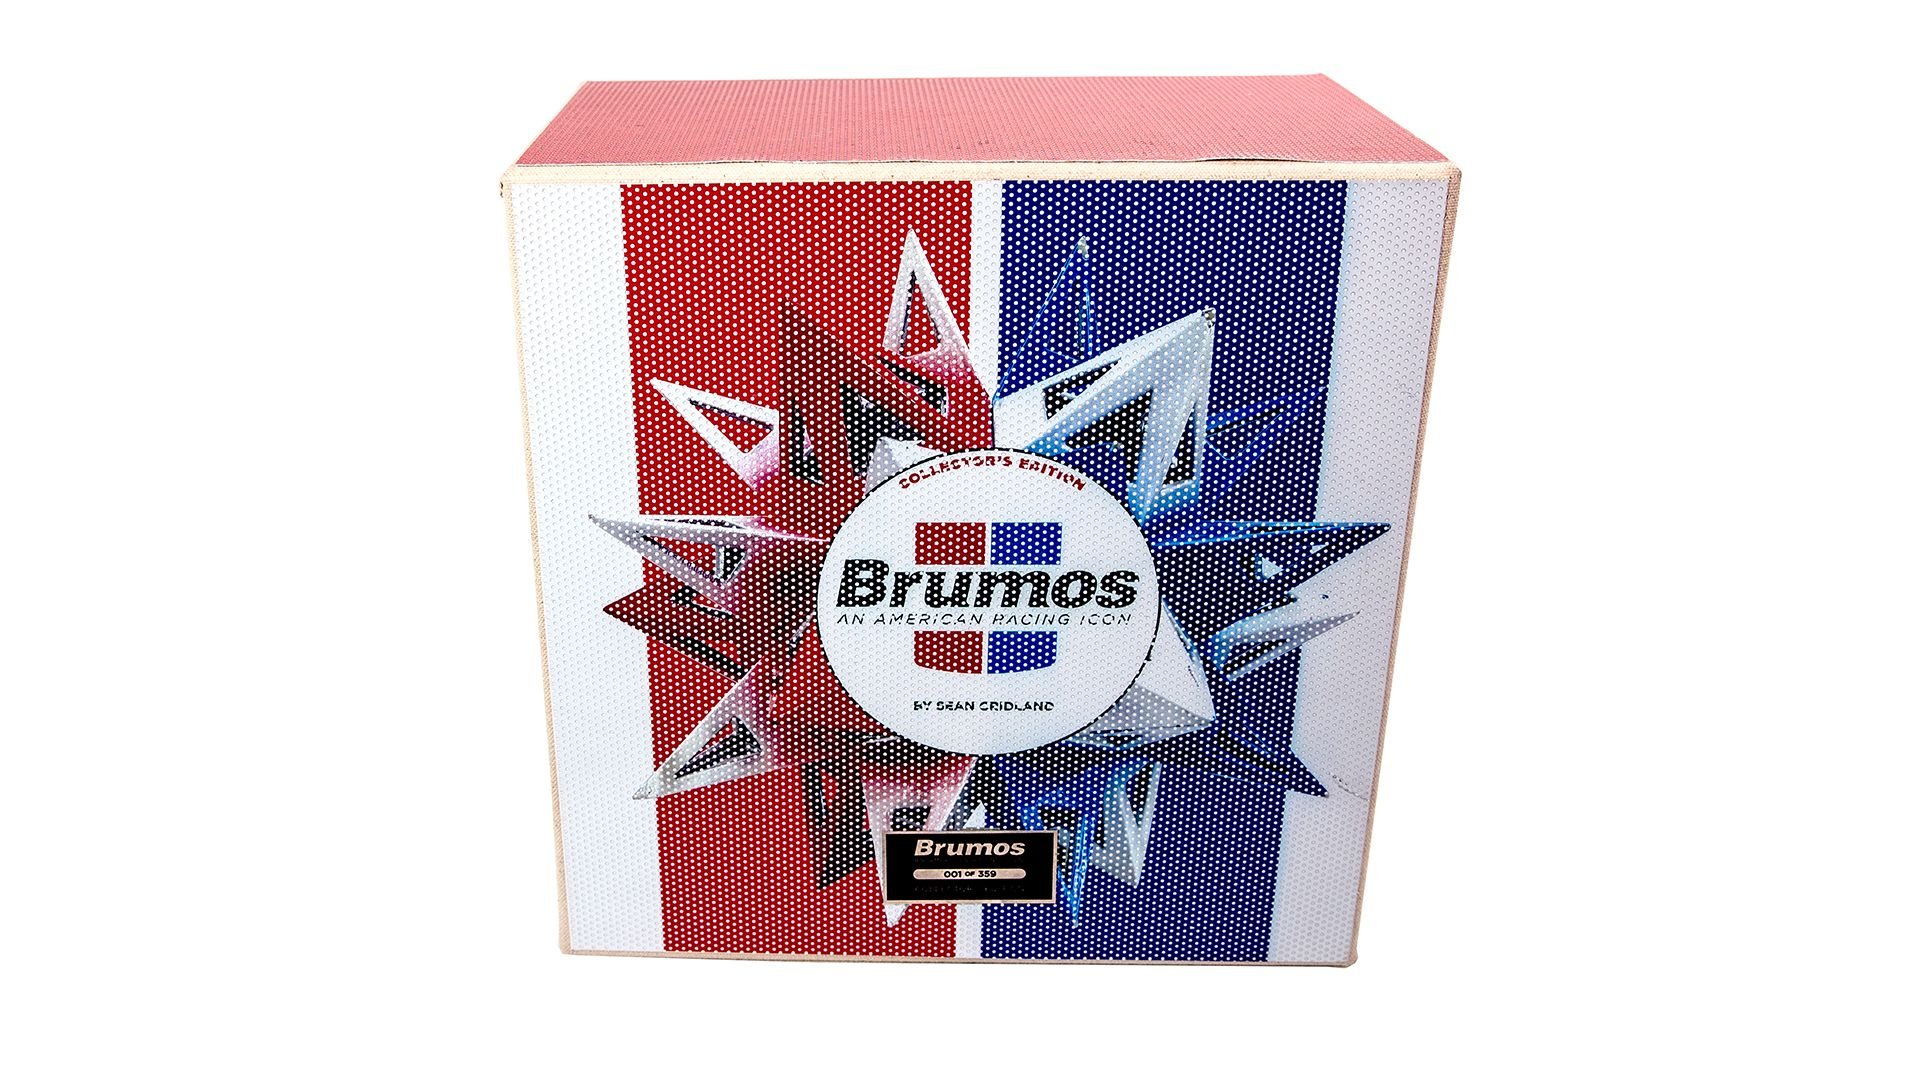 For Sale BRUMOS: An American Racing Icon Numbered Collector's Edition by Frank Stella